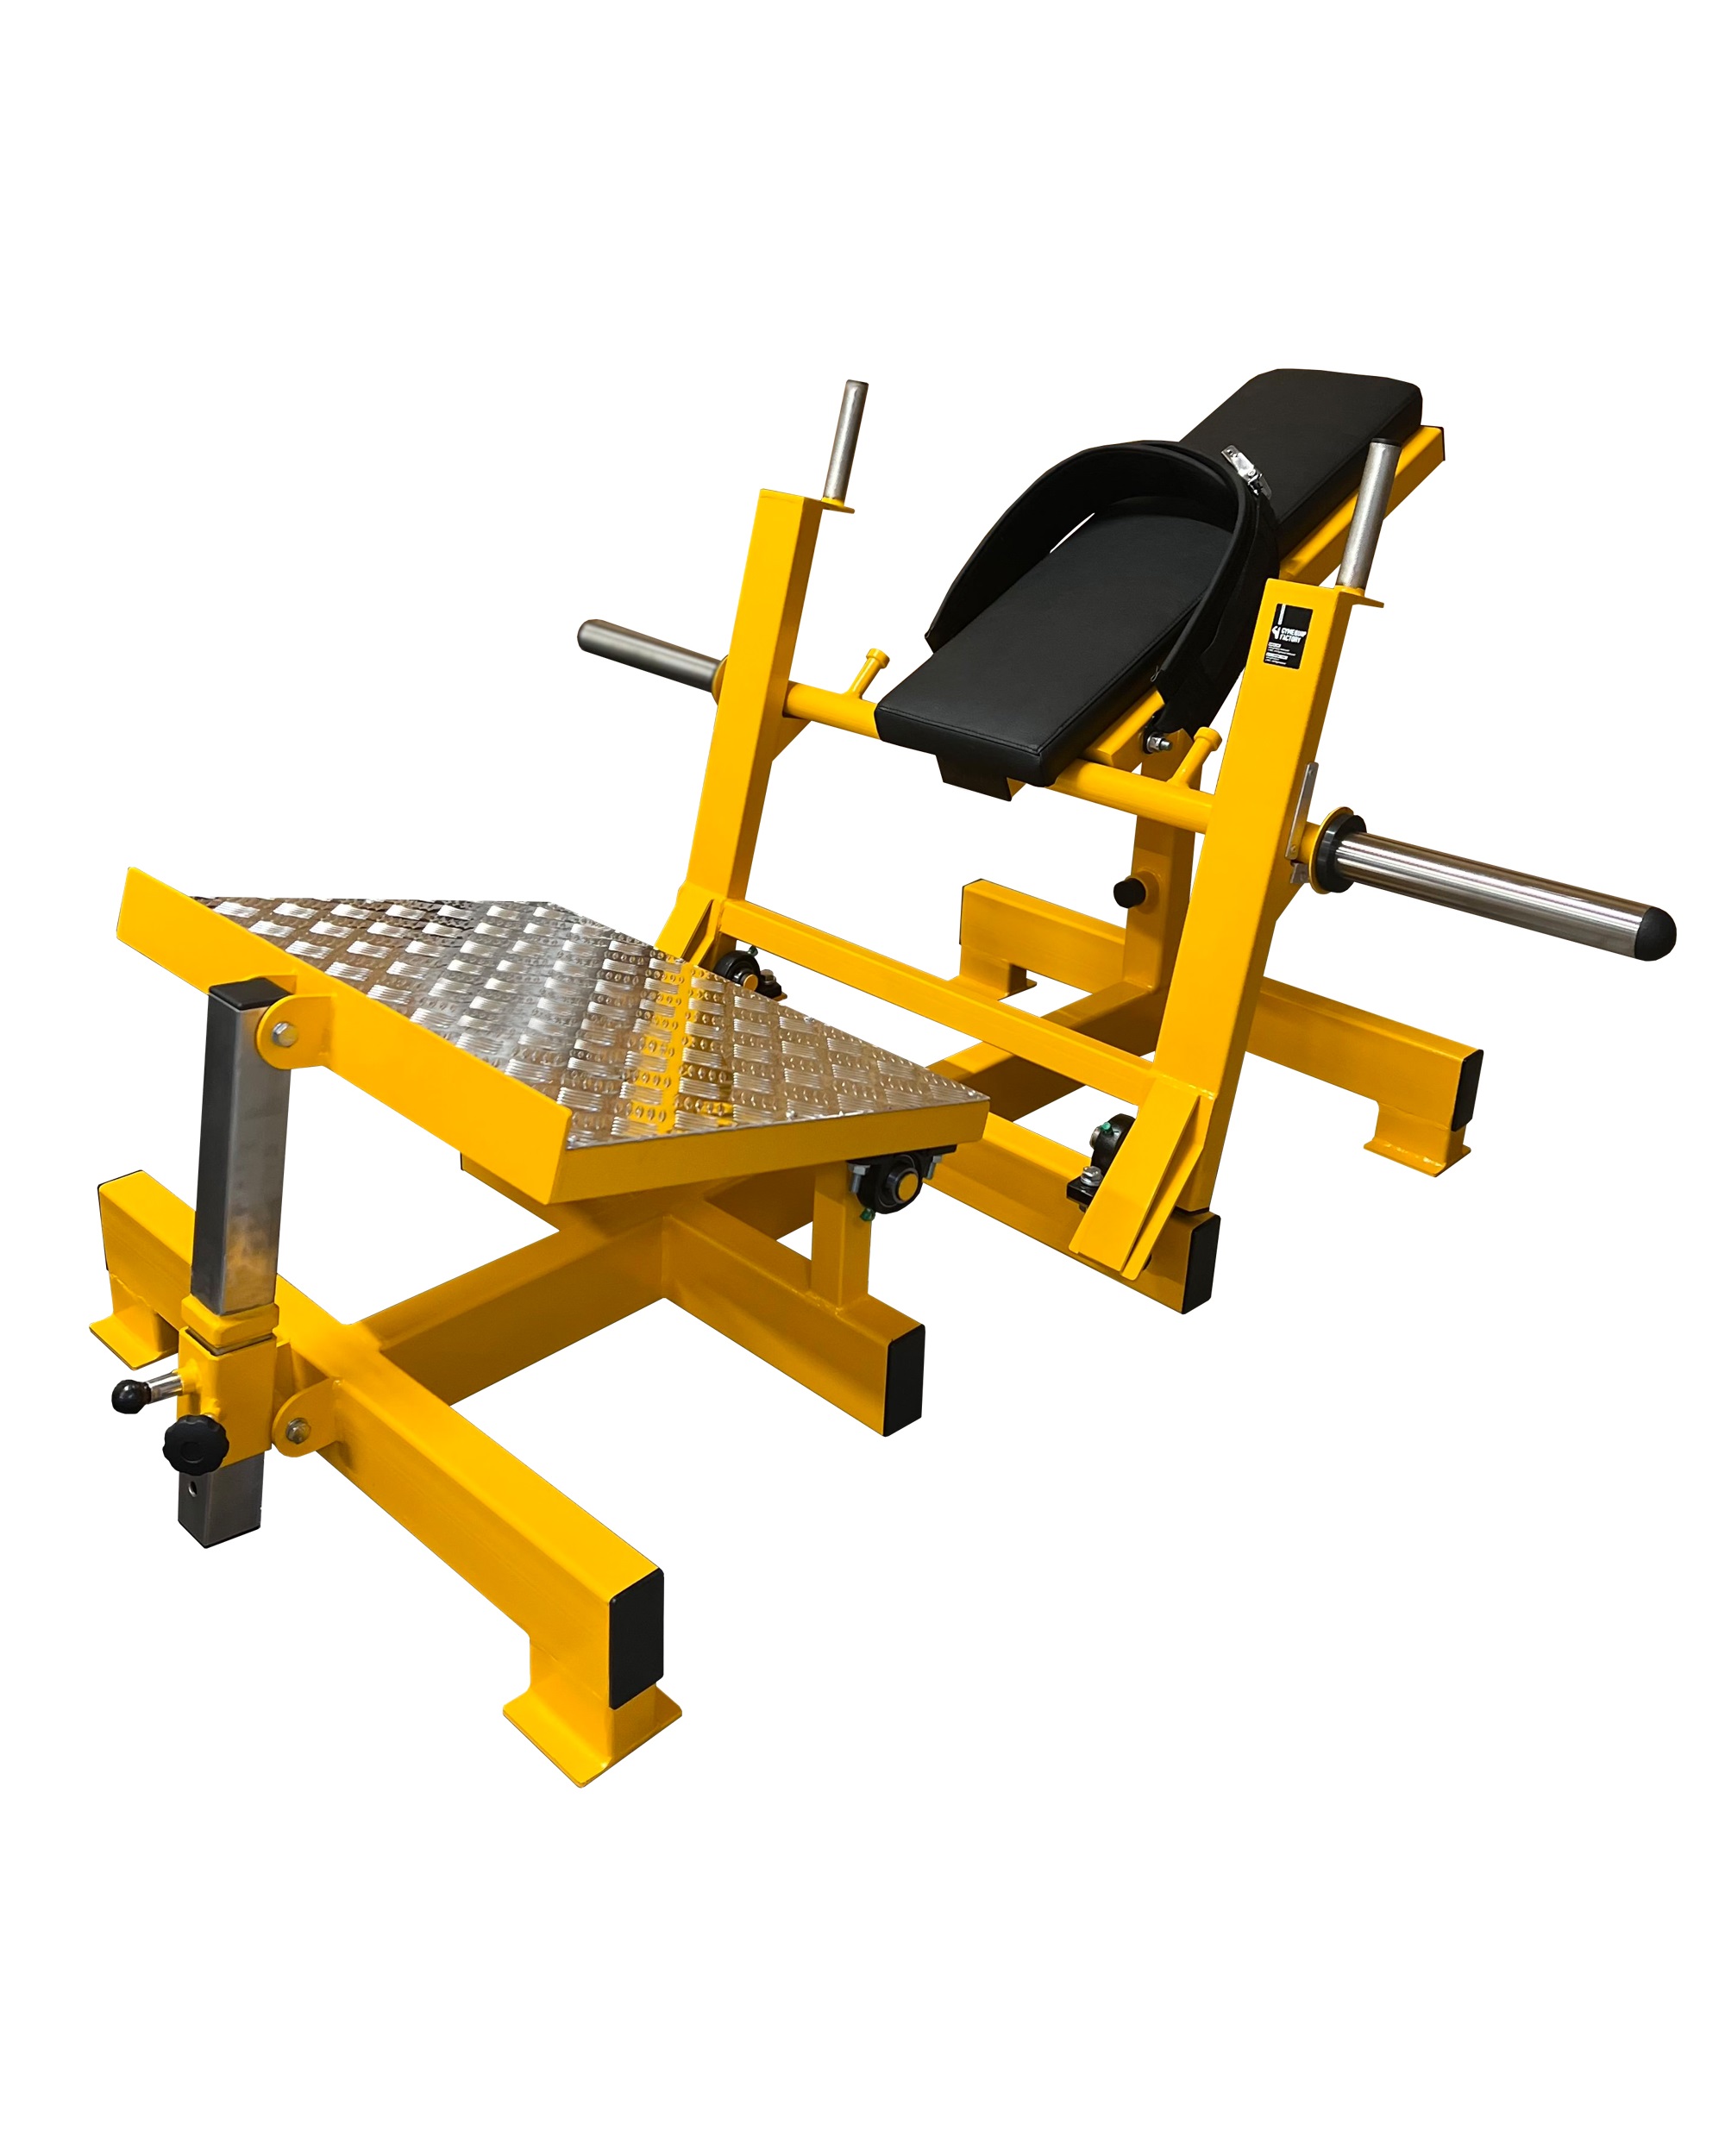 How To Use A Hip Thrust Machine?